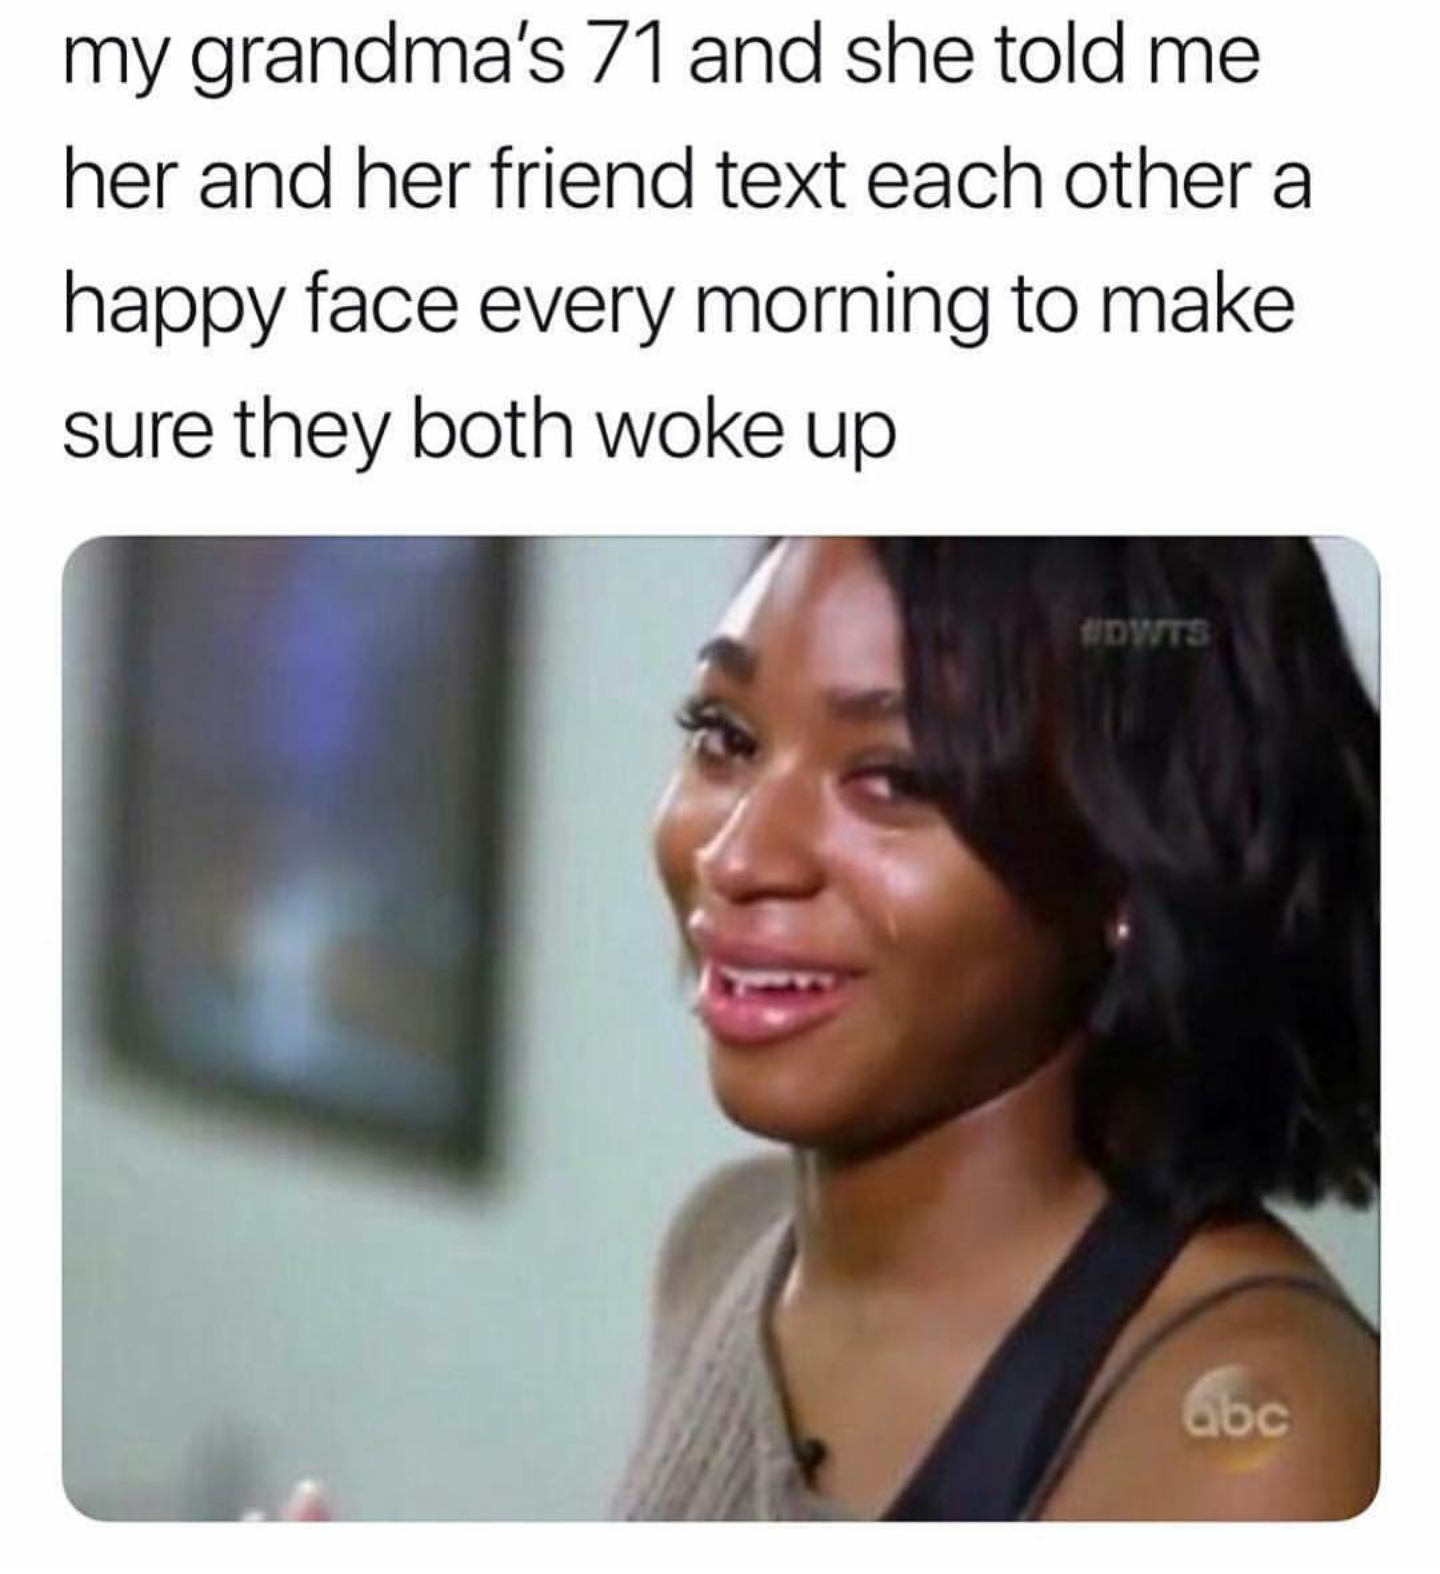 black twitter wholesome memes you can show your grandma - my grandma's 71 and she told me her and her friend text each other a happy face every morning to make sure they both woke up Com abc